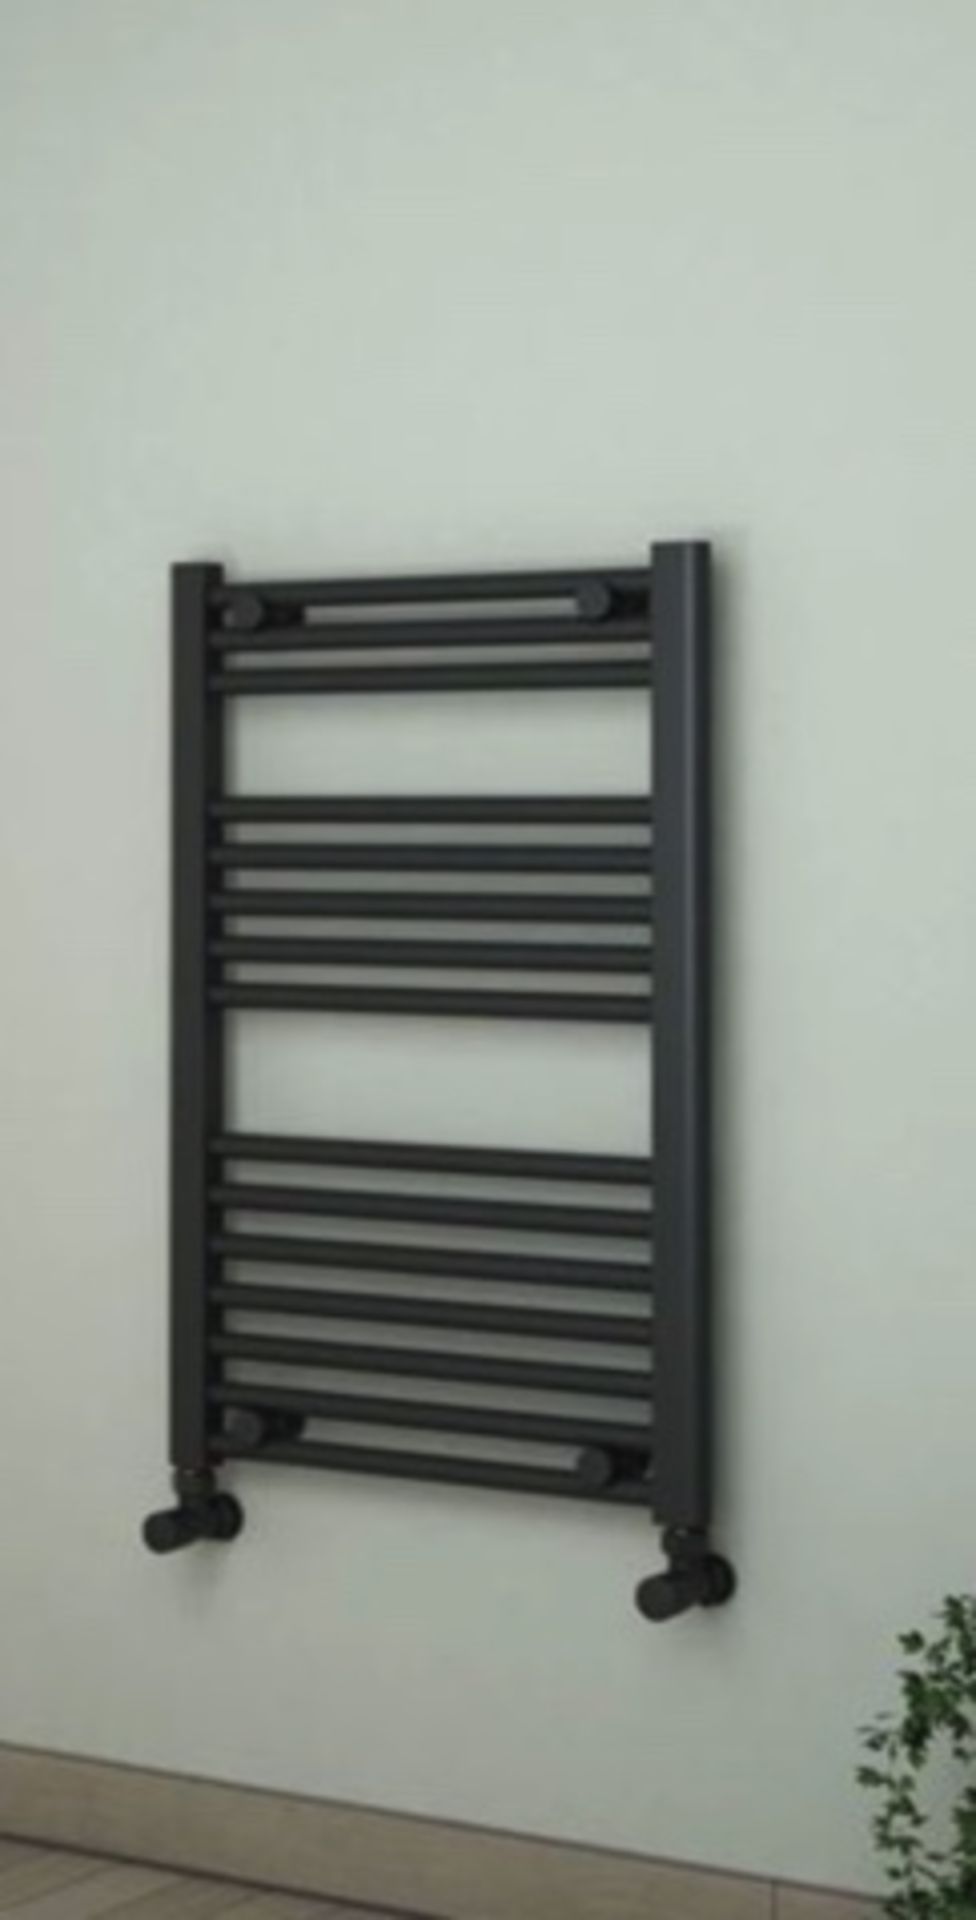 Brand New Boxed Anthracite Towel Radiator 500mm Wide 750mm High RRP £89.99 **NO VAT**